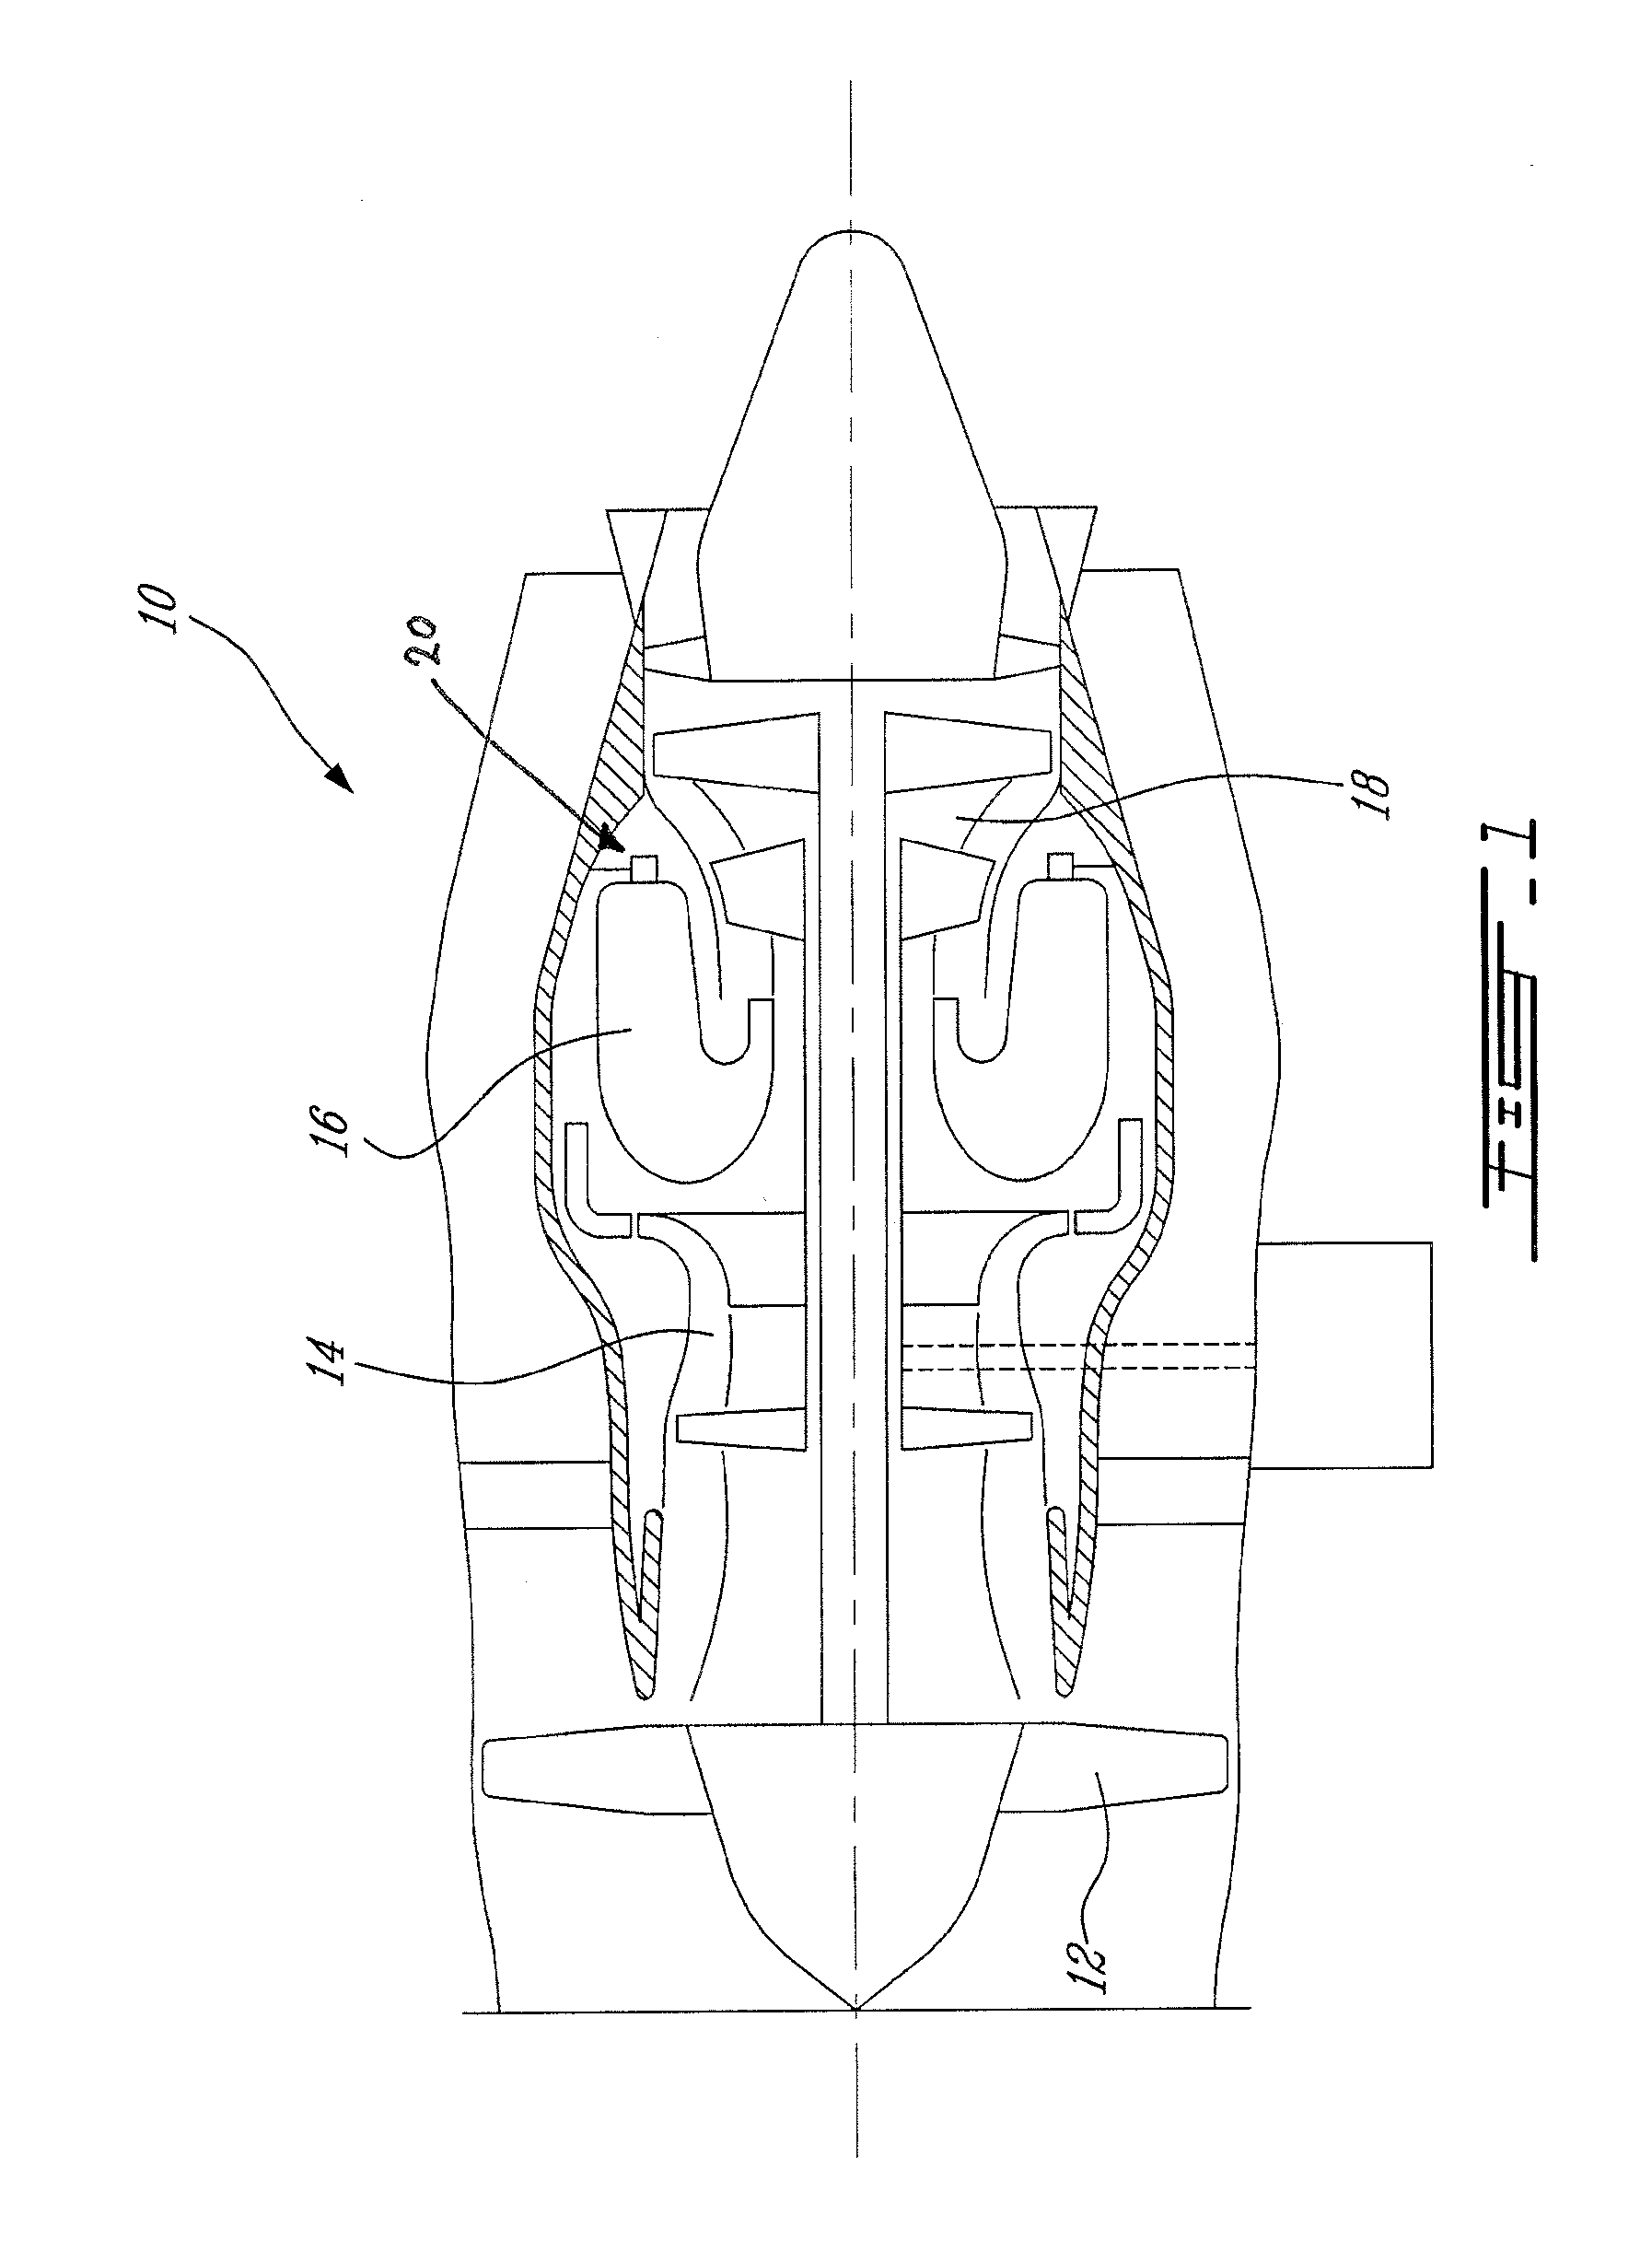 Internal fuel manifold and fuel fairing interface